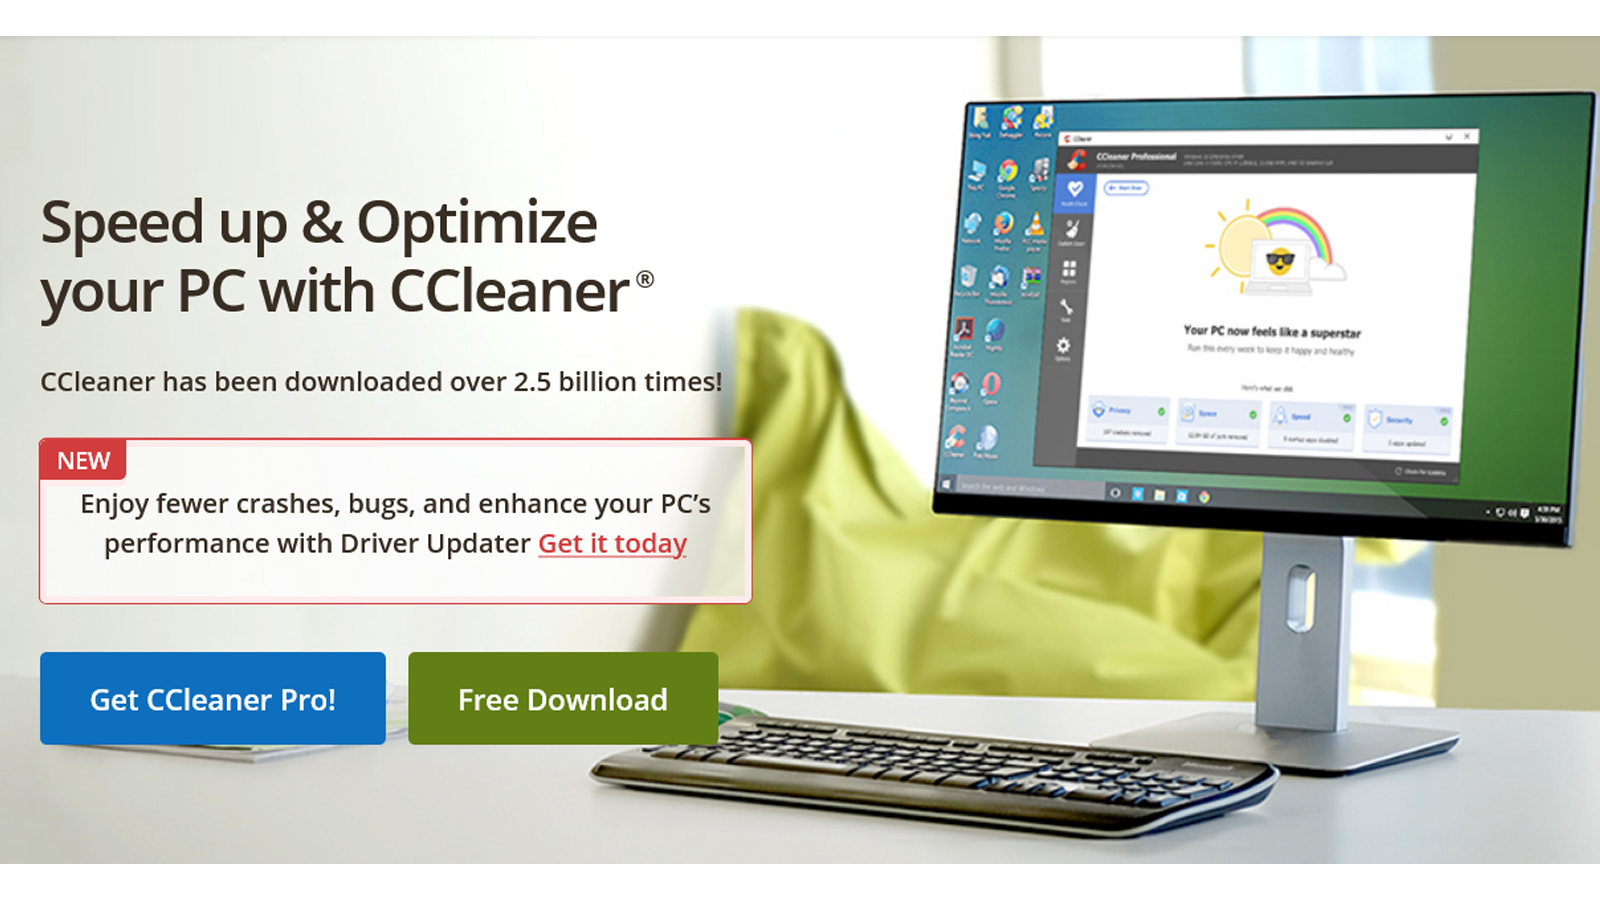 Find detailed information about CCleaner